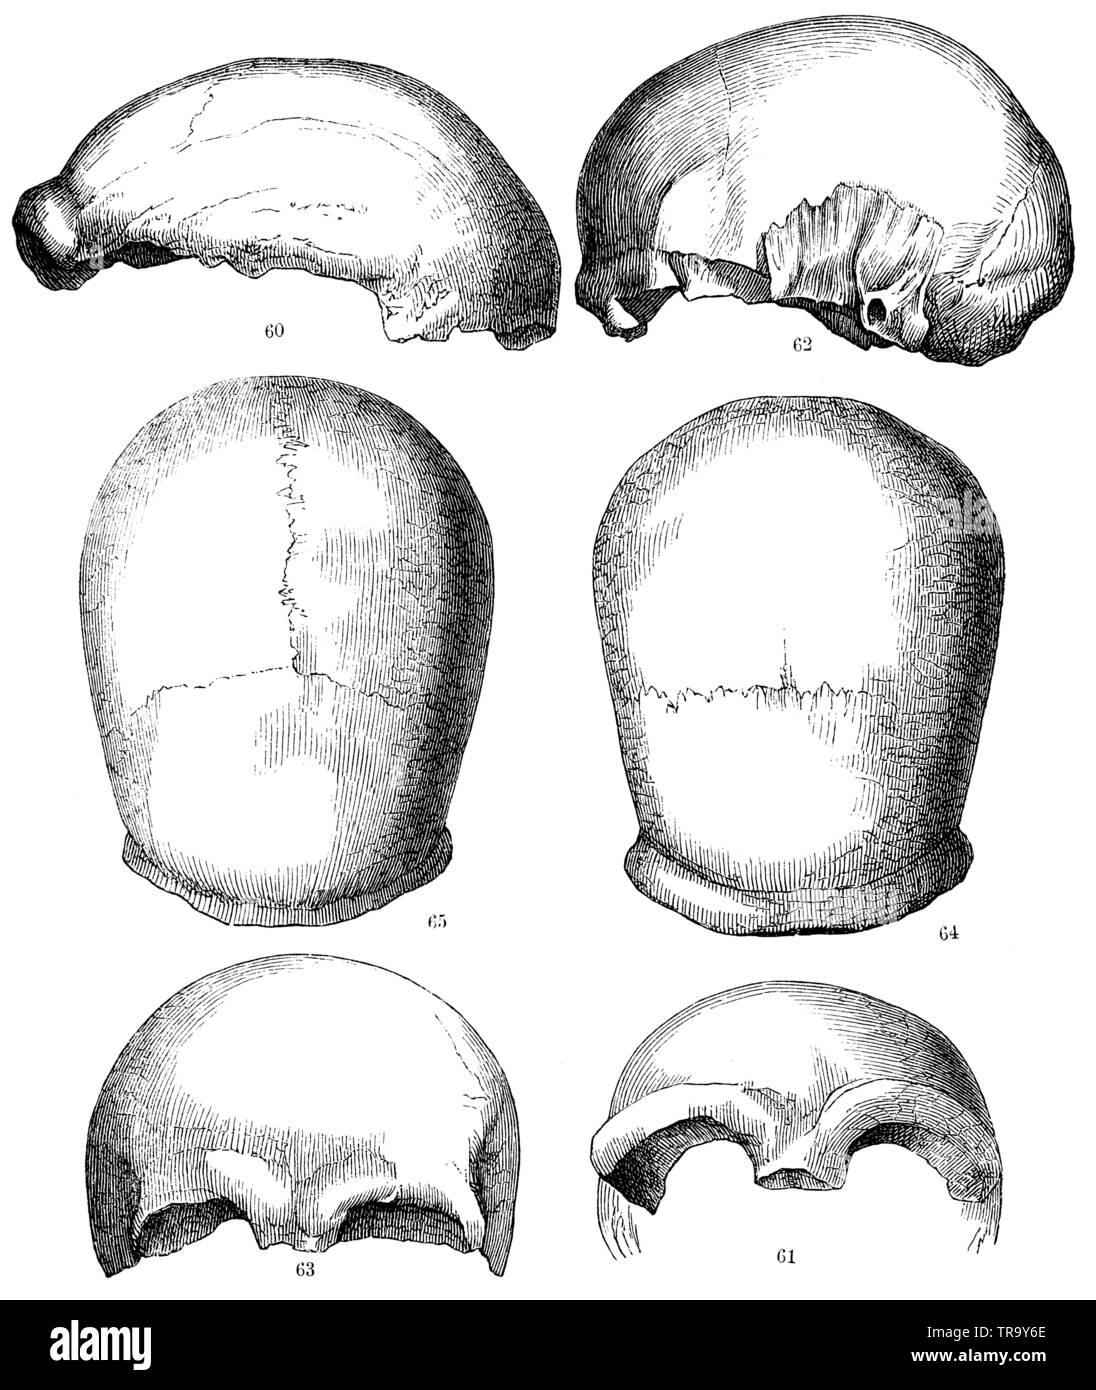 Skull shapes. 60) from the Neanderthal (profile). 61) Seen from the front from the Neanderthal. 62) from Engis (in profile). 63) from Engis from the front. 64)Neanderthal skull from above. 65) Engis skull from above., ,  (anthropology book, 1874) Stock Photo